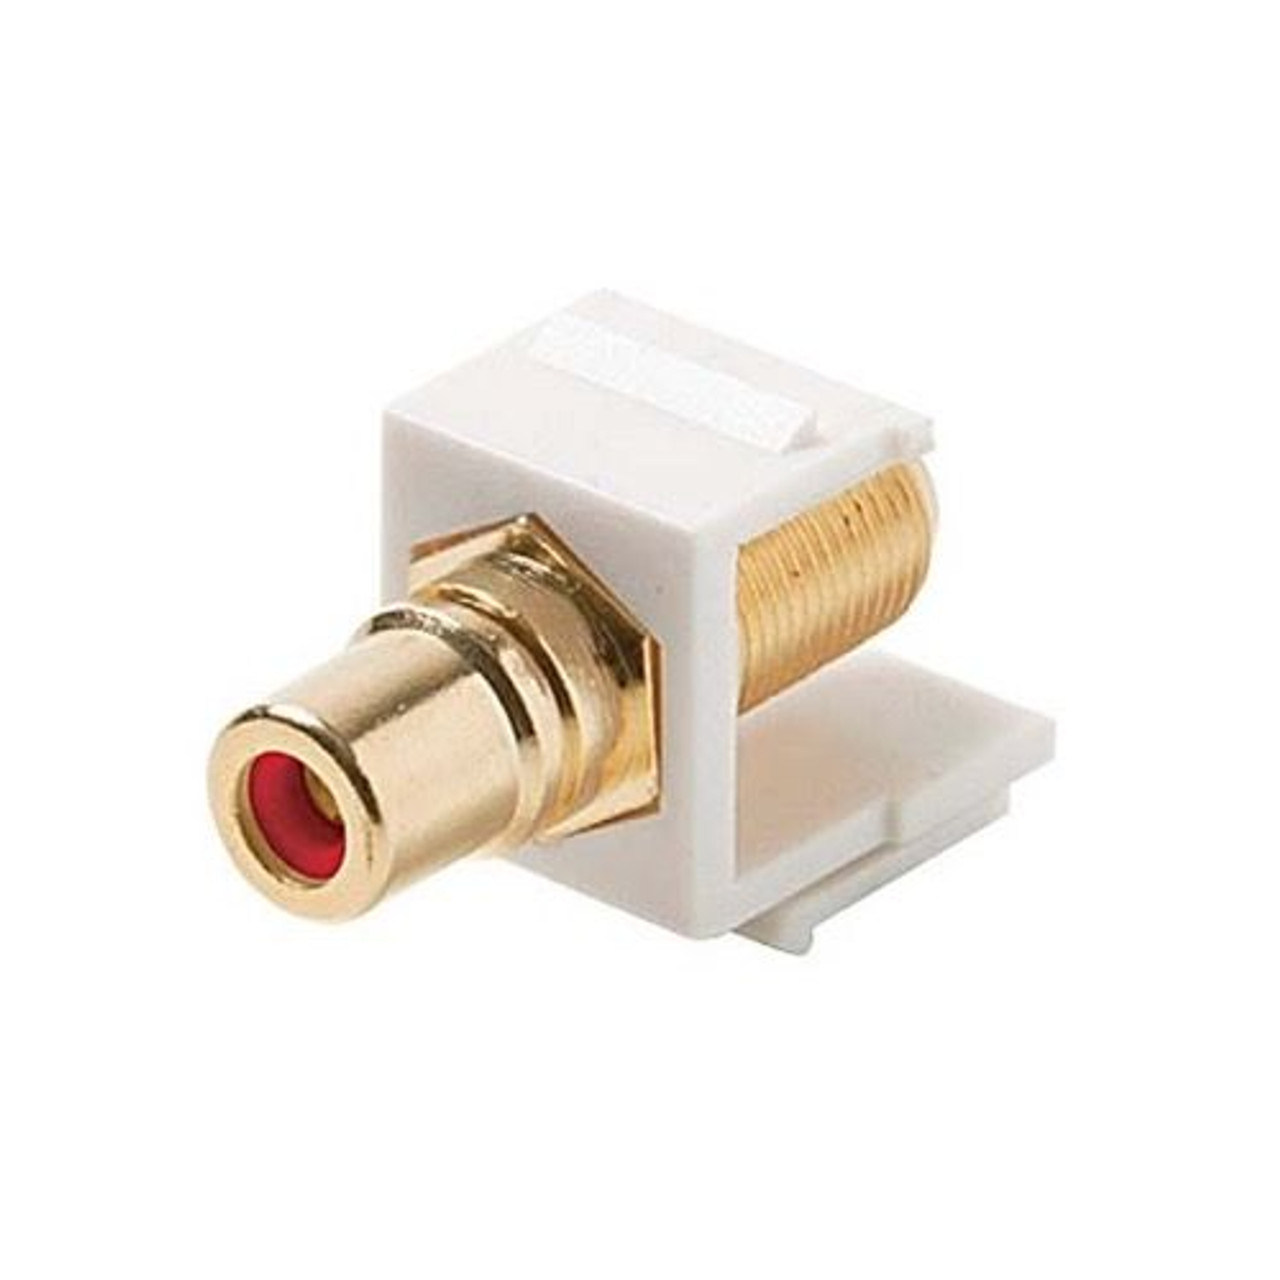 Steren 310-466WH Keystone Insert White RCA Jack to F Jack RED BAND Gold Plate Connector Barrel RCA to F81 75 Ohm Snap-In Plug QuickPort Coax Cable TV Video Signal Plug Wall Plate Component, Part # 310466-WH